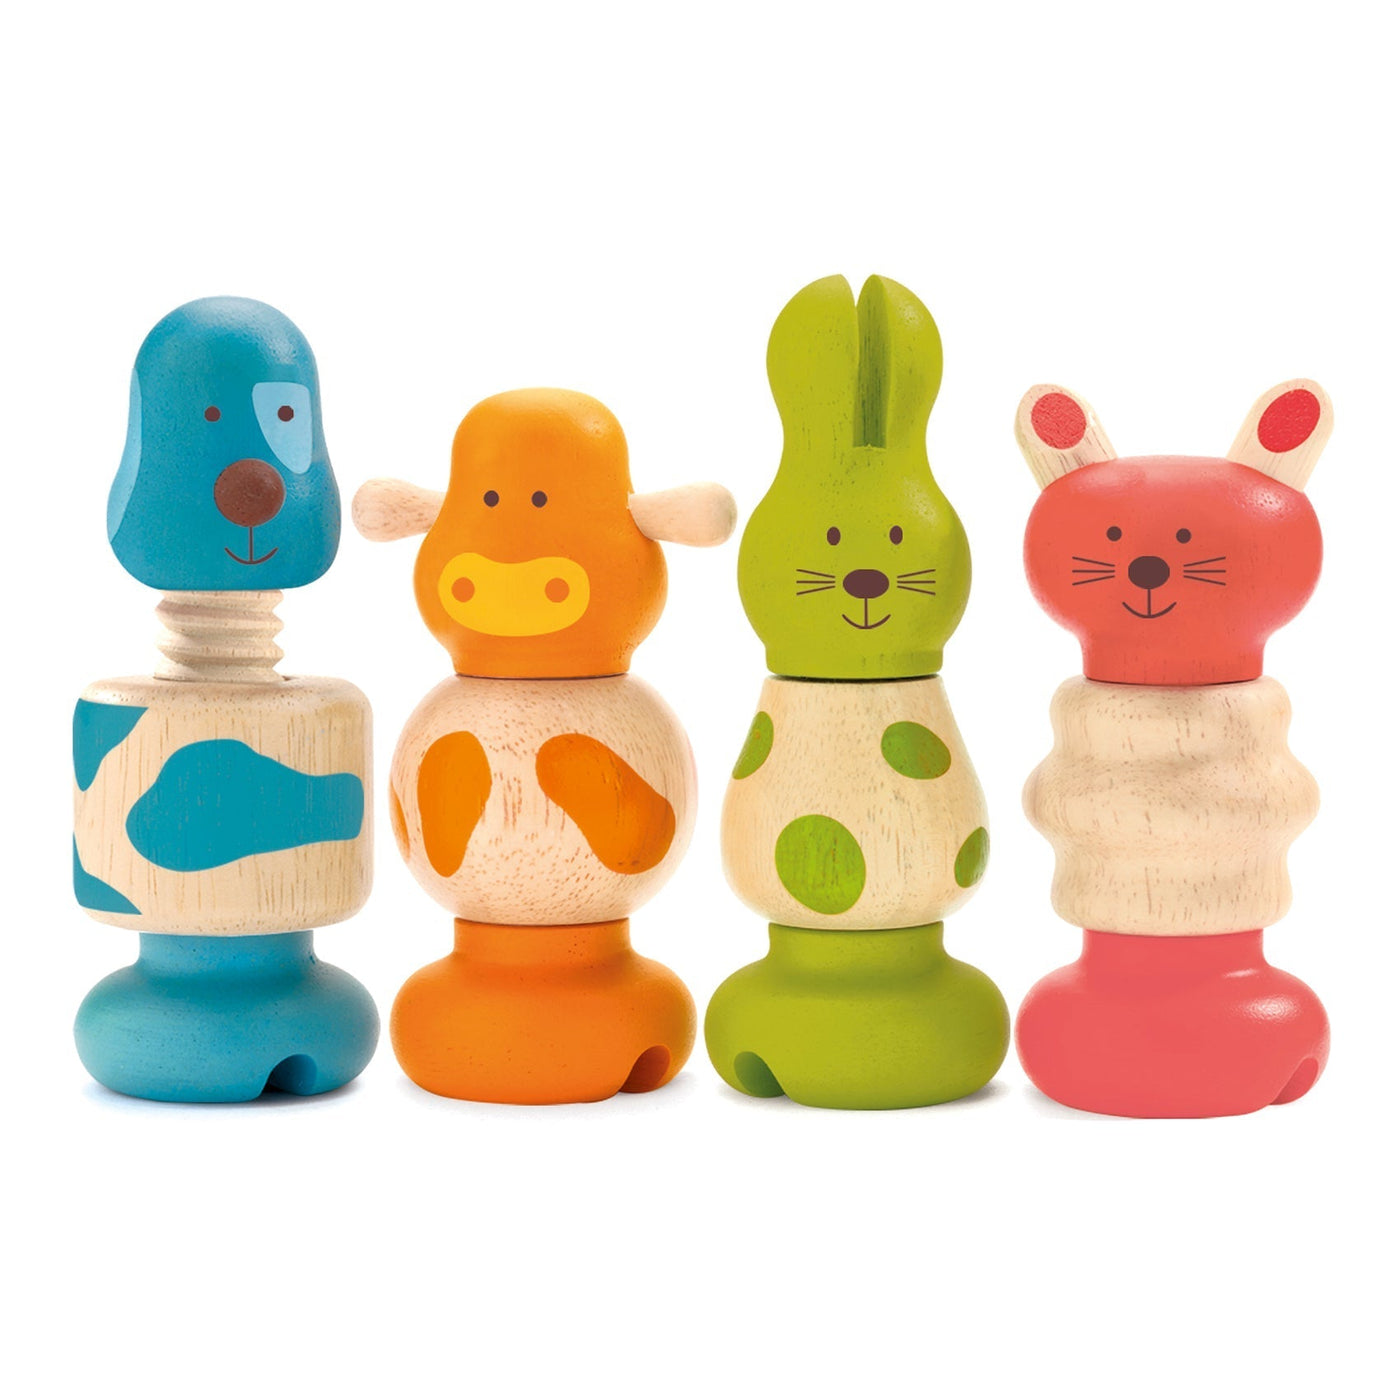 Vis-Animo * - Early Years - Early Development Toys